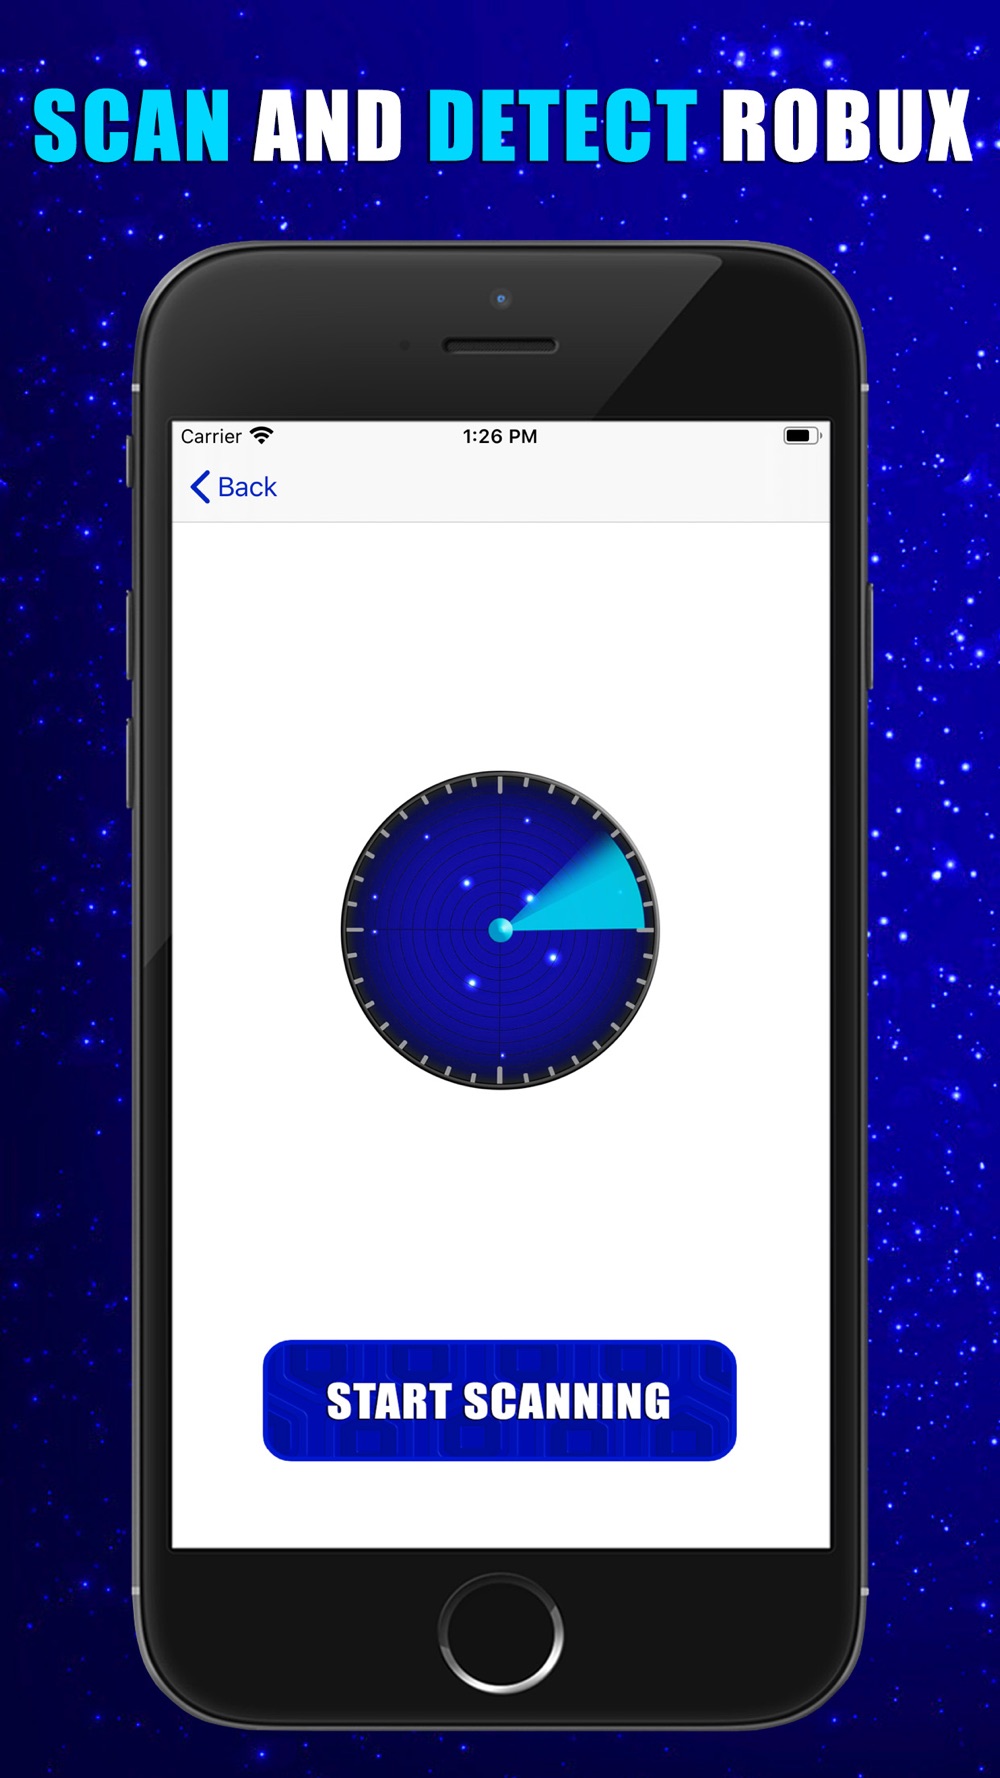 Robux Radar Scanner For Roblox Free Download App For Iphone Steprimo Com - is roblox free on iphone